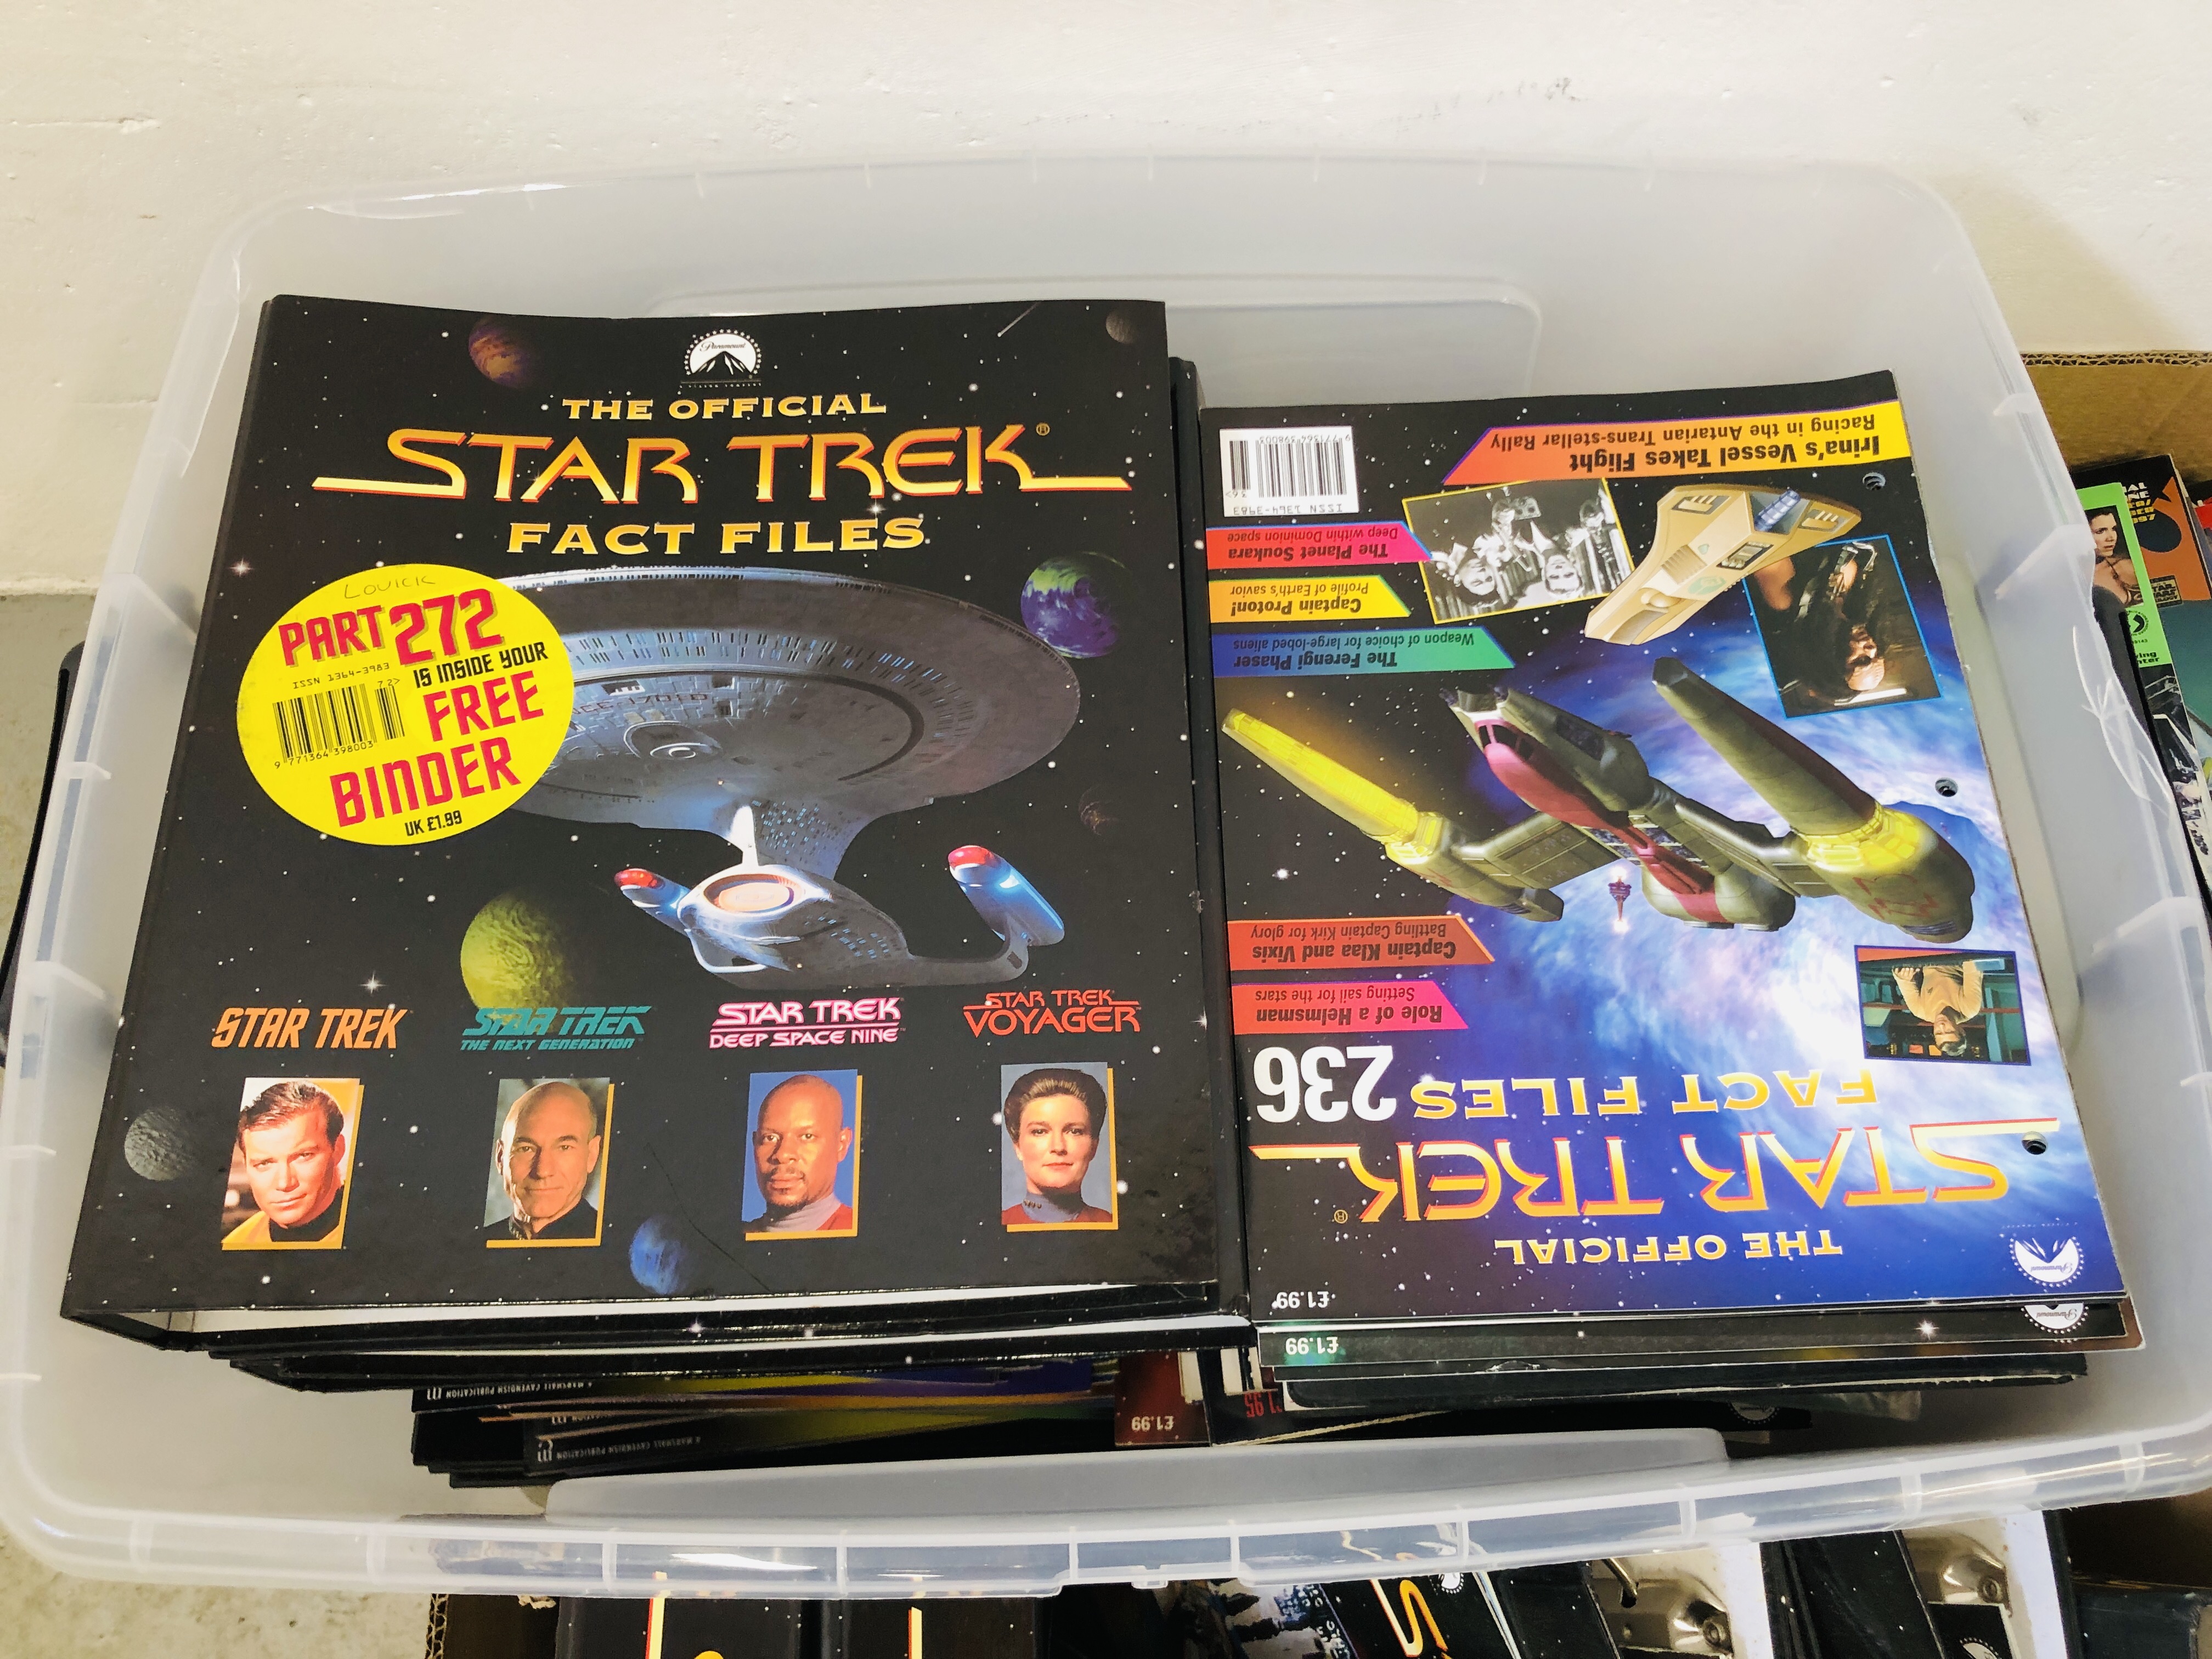 A LARGE COLLECTION OF STAR TREK FACT FILES ALONG WITH OTHER STAR TREK MAGAZINES, THE FINAL FRONTIER, - Image 7 of 7